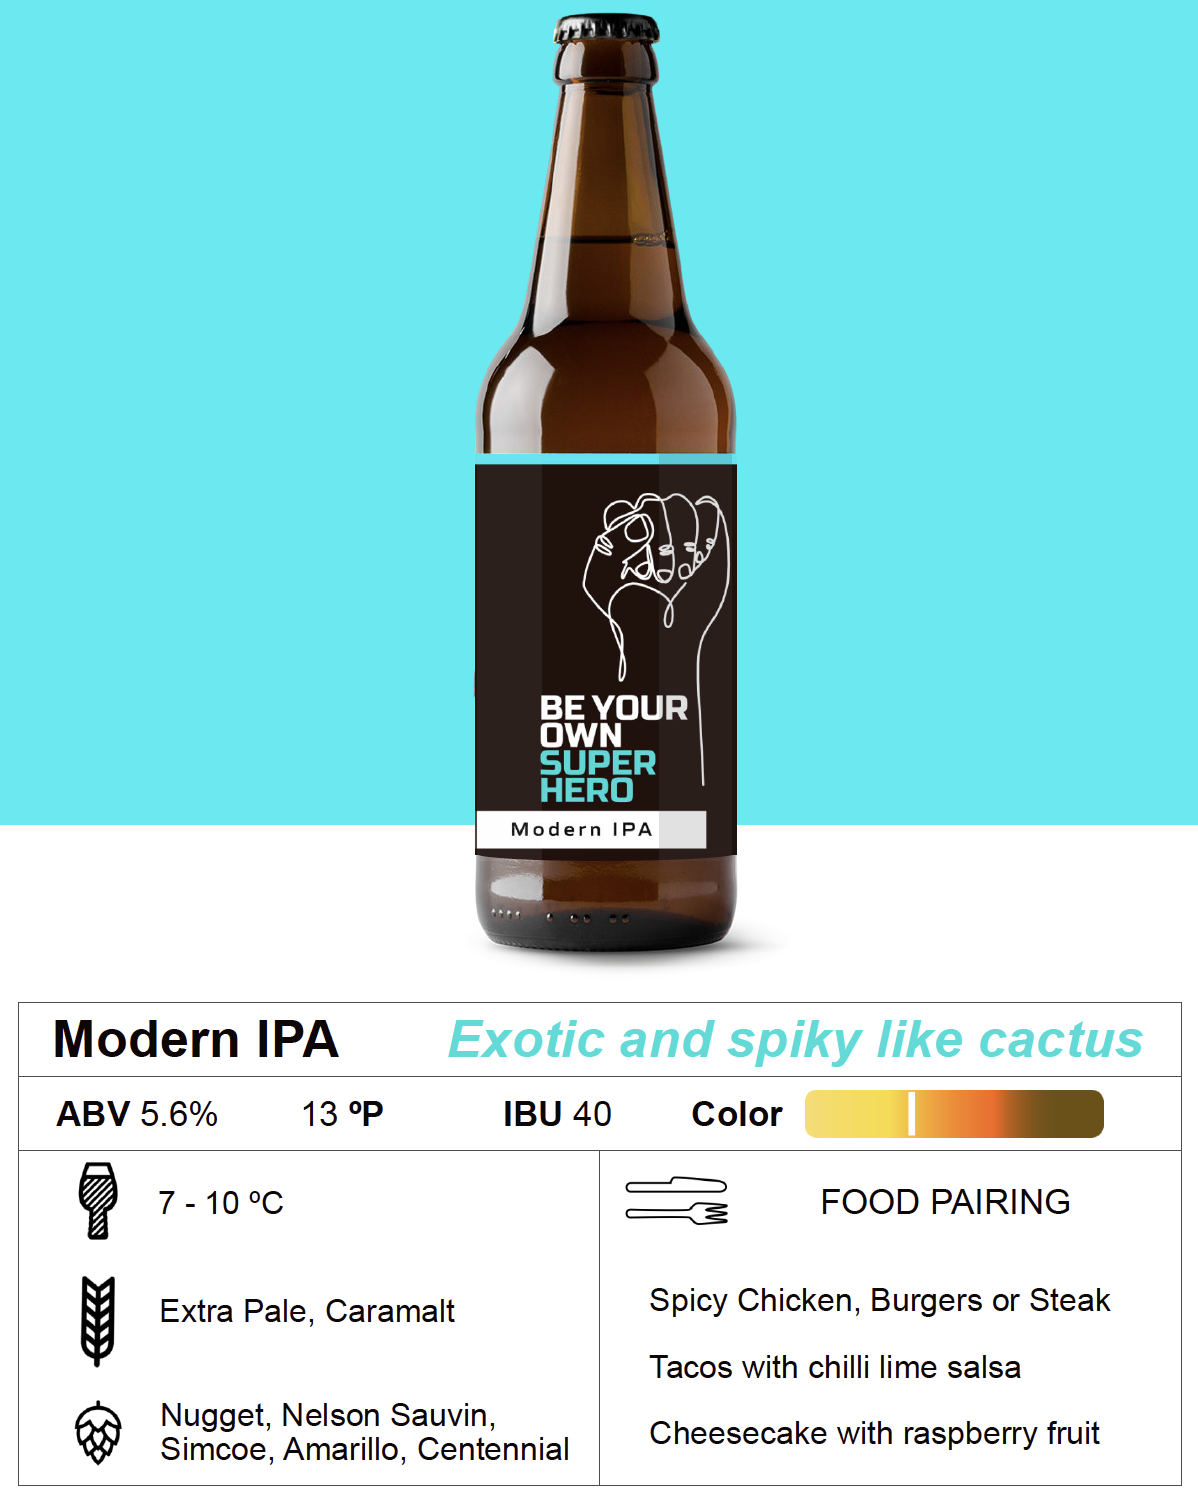 Modern IPA bottle and attributes